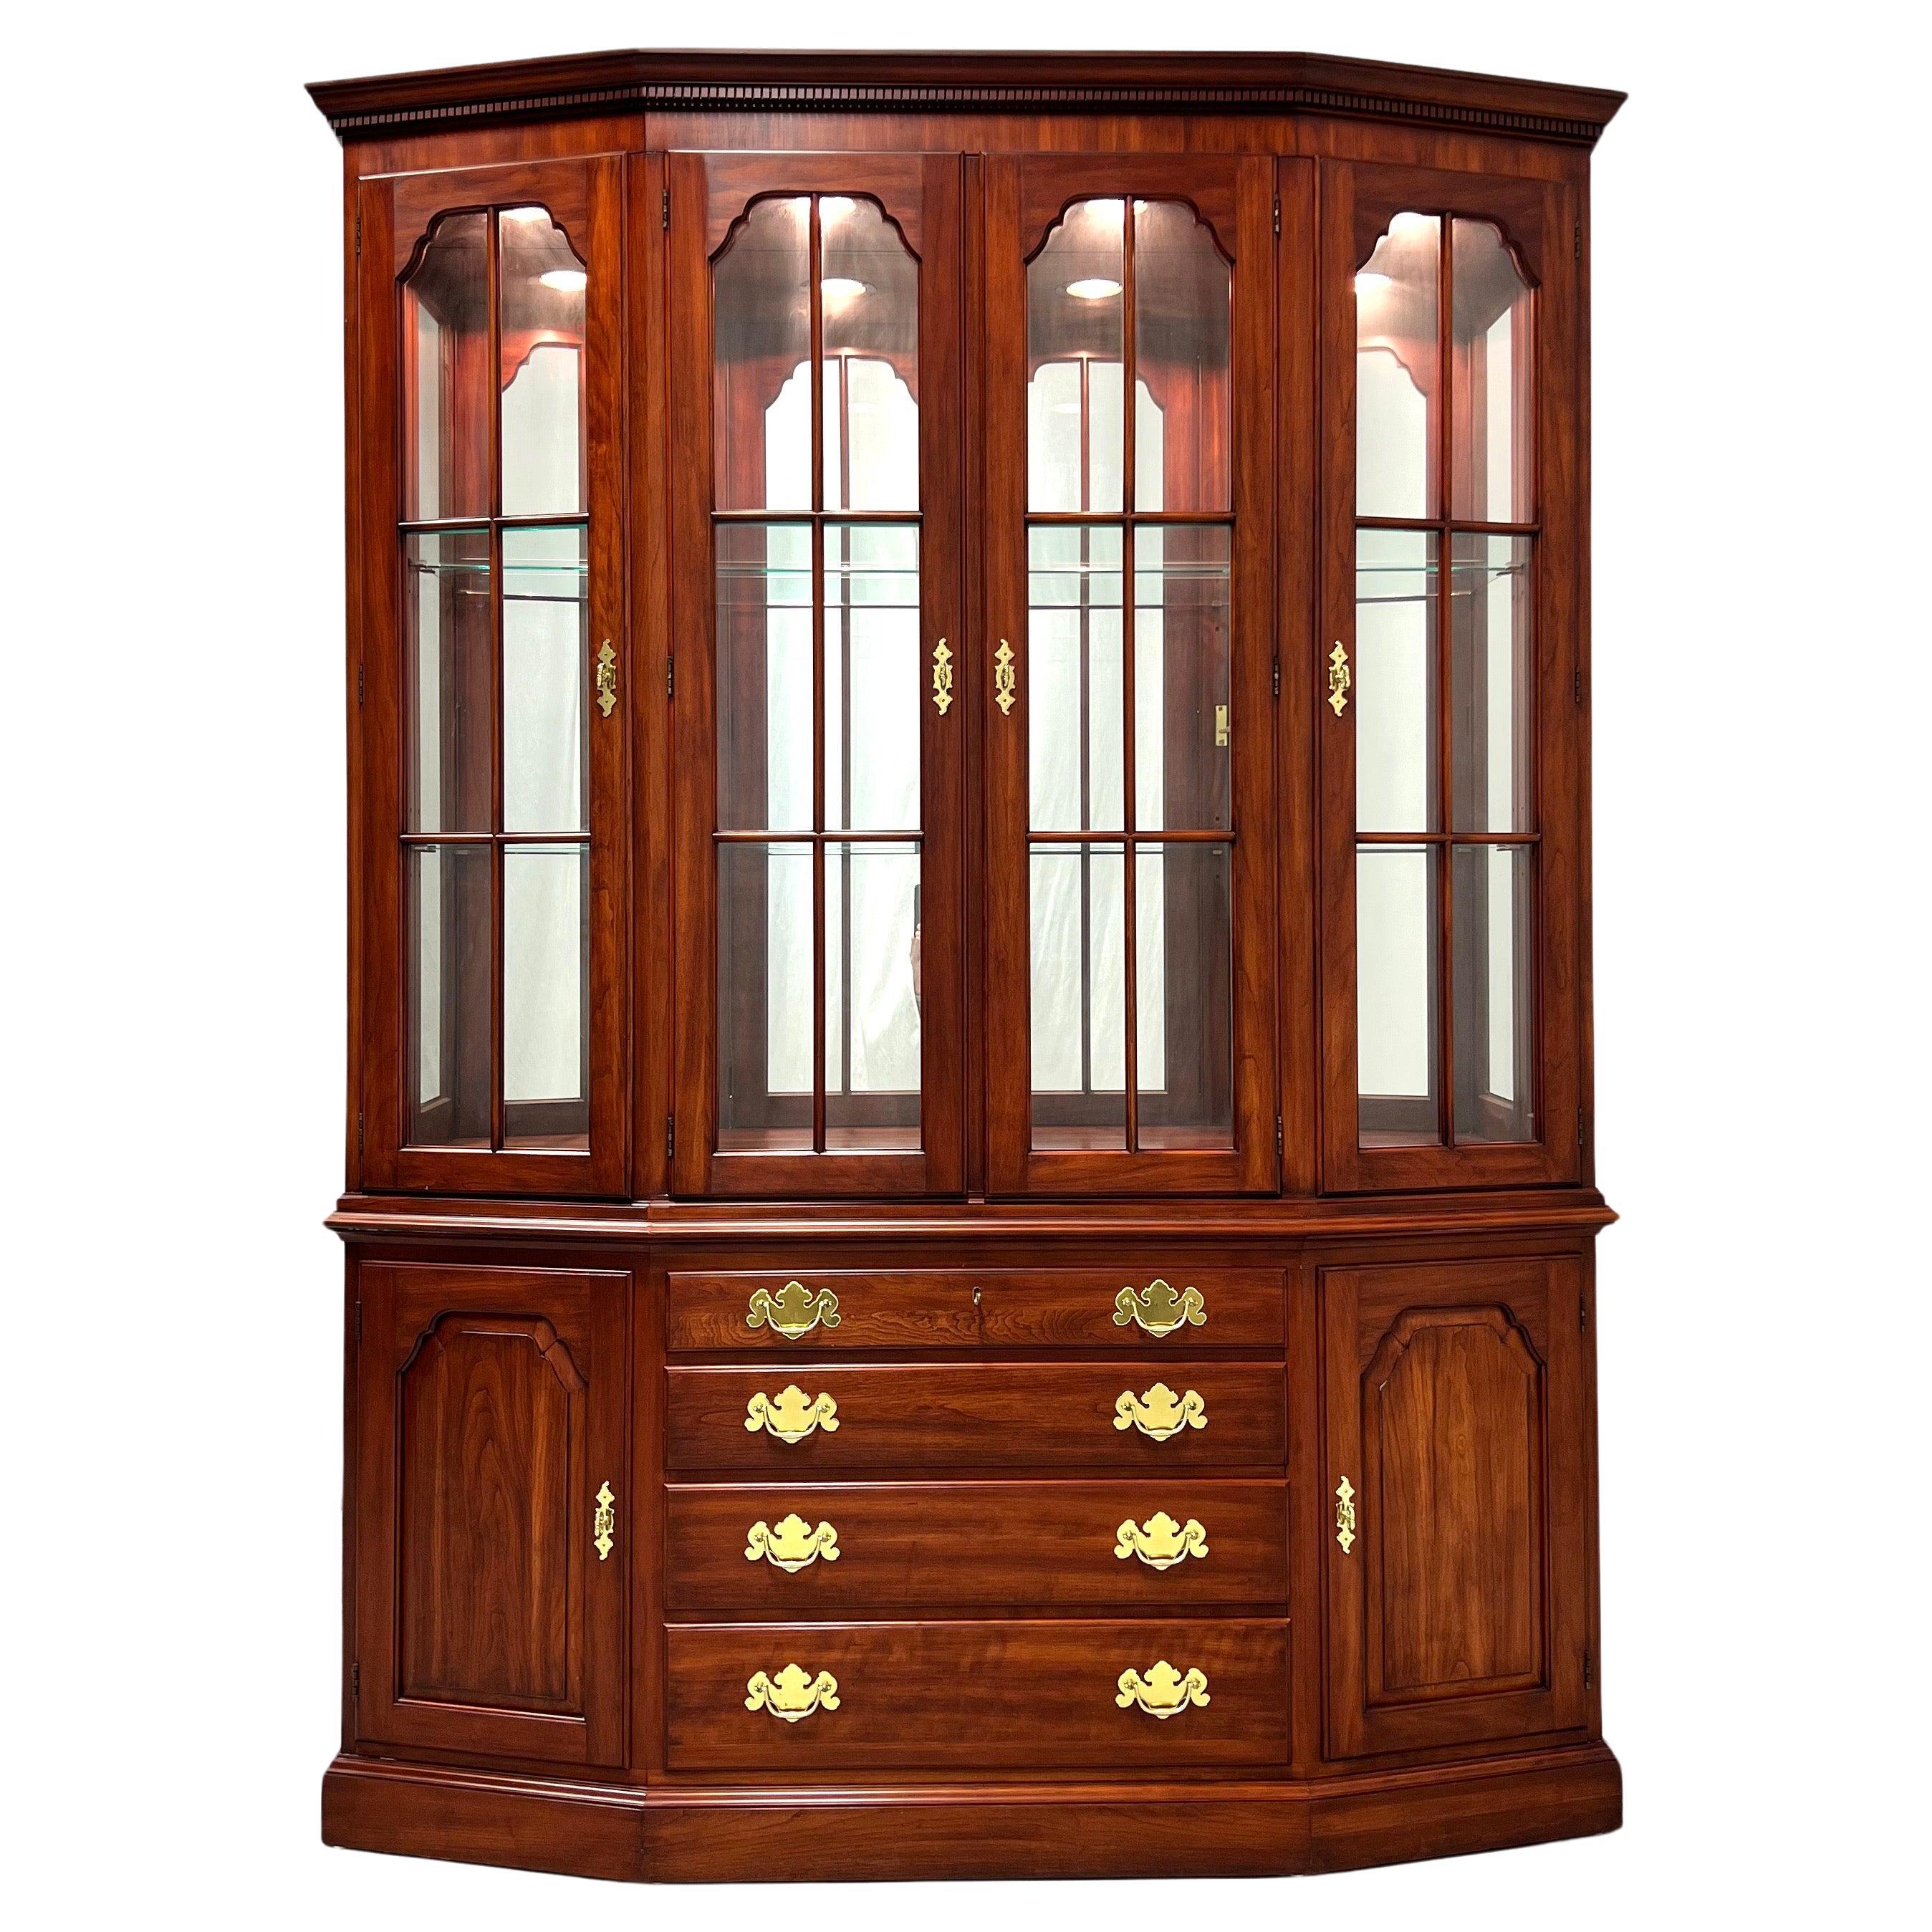 HENKEL HARRIS 2364 24 Solid Wild Black Cherry Traditional Canted China Cabinet